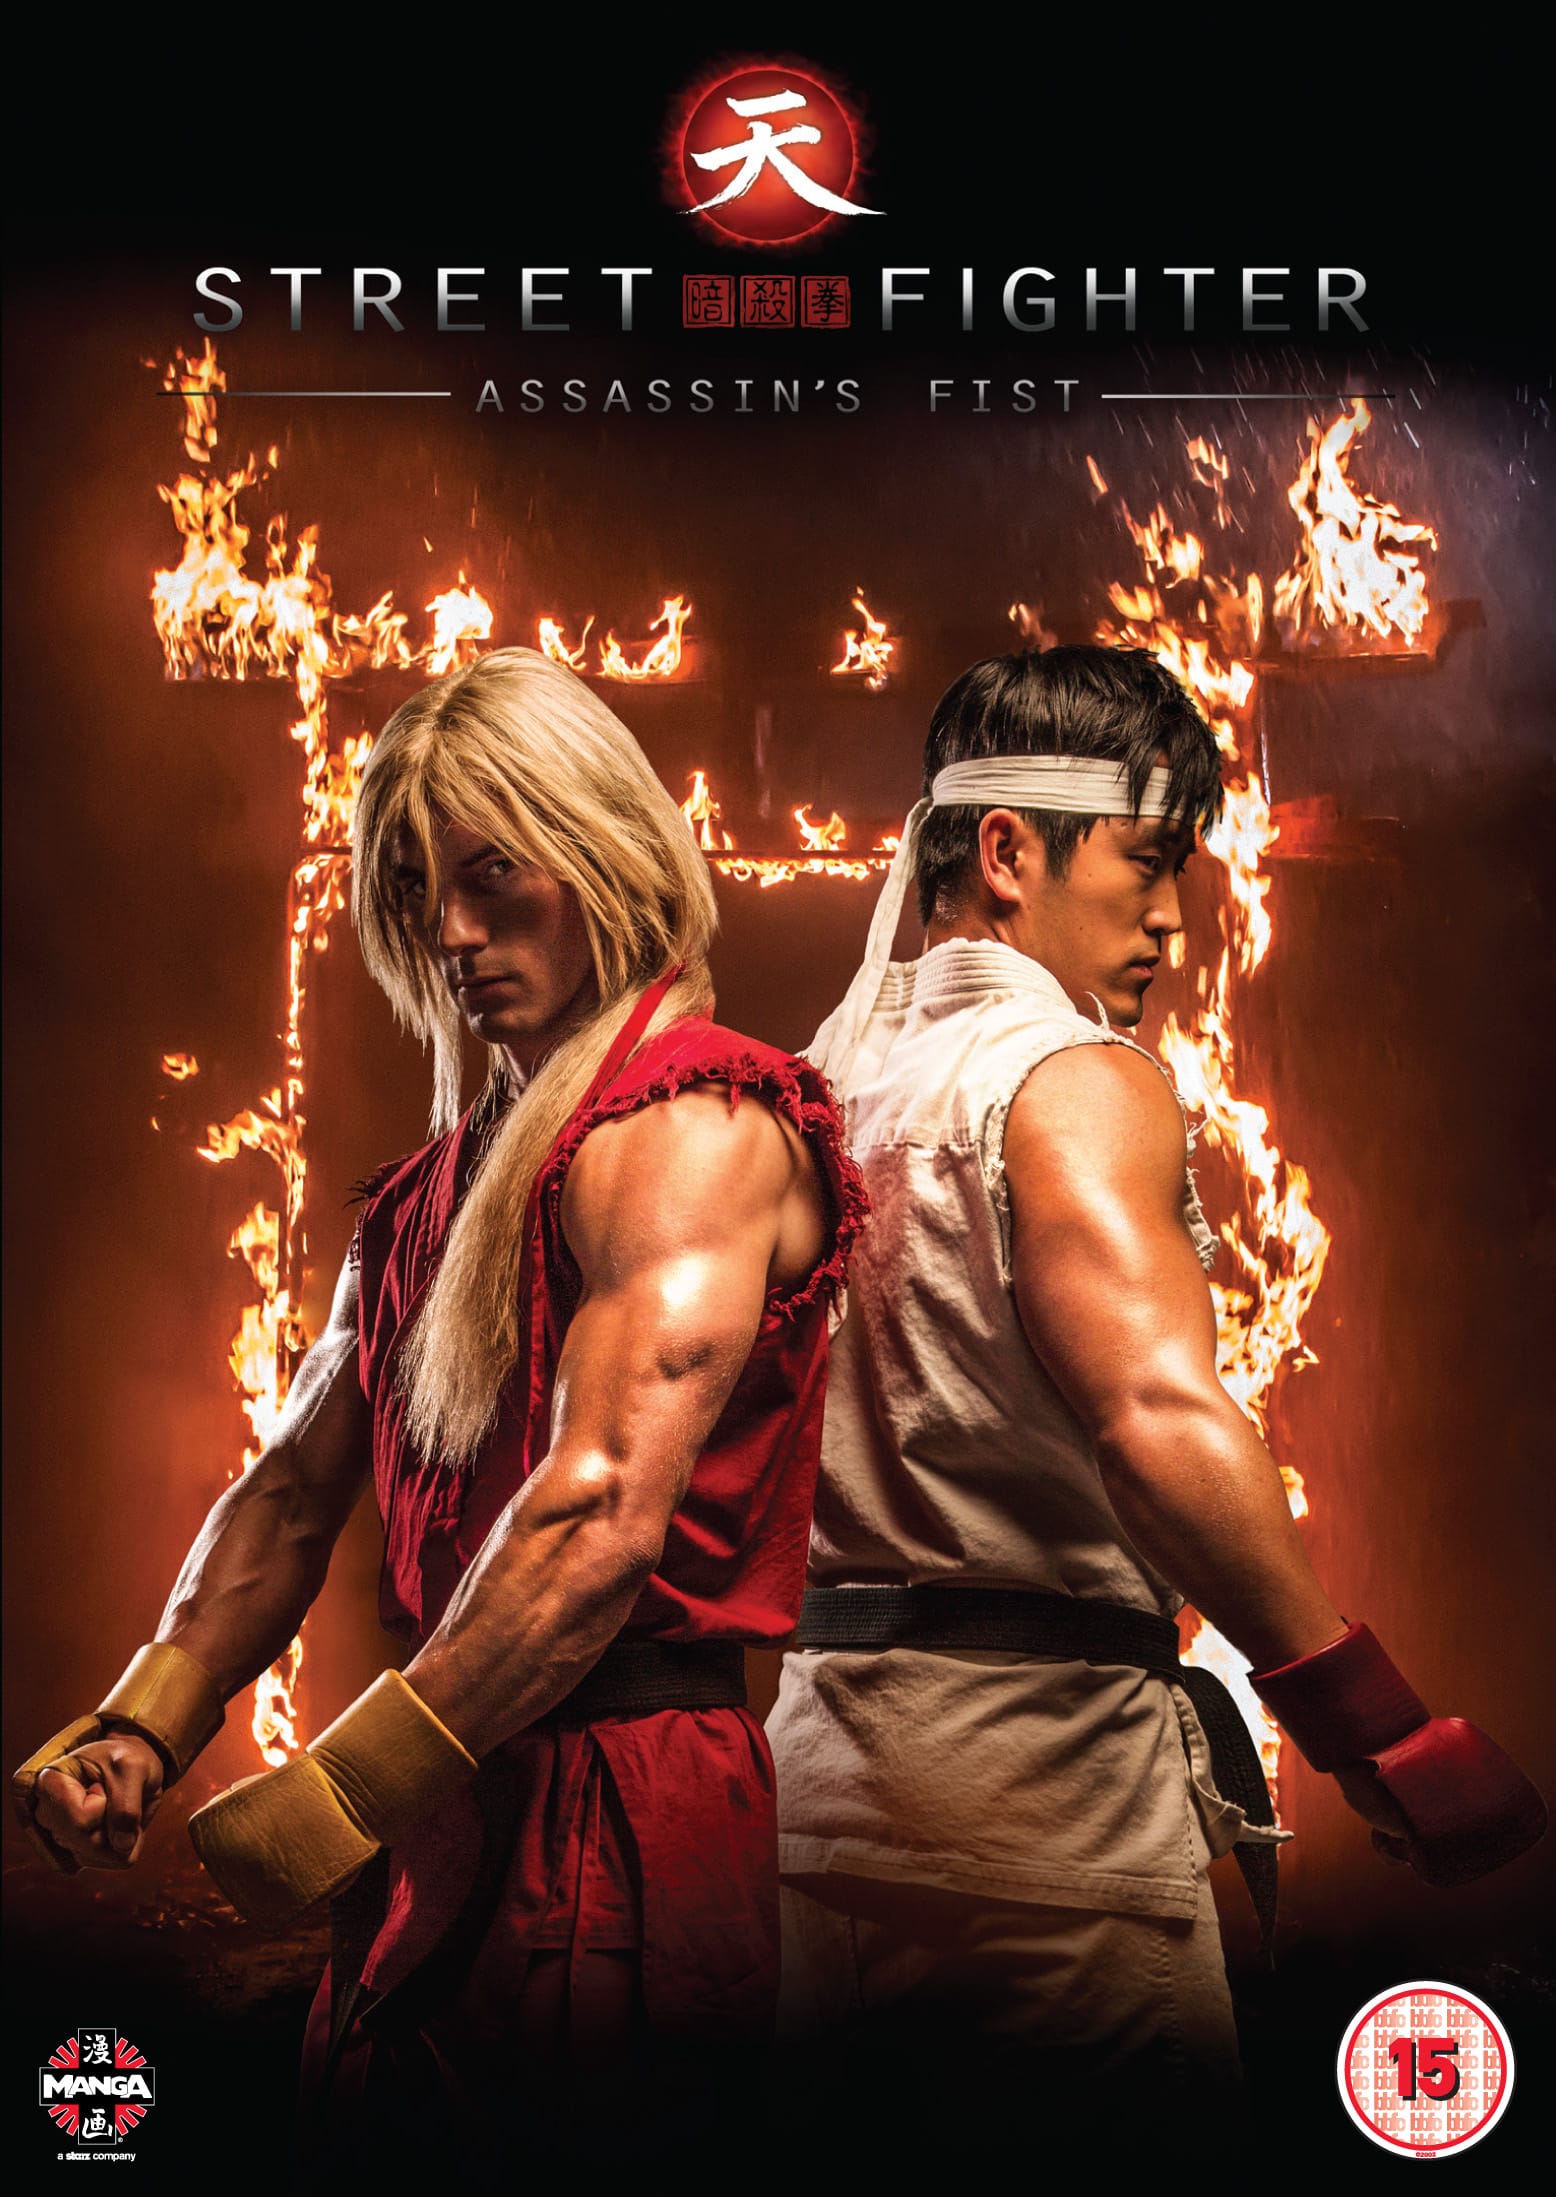 Dazzling martial arts: A review of Street Fighter – Assassin's Fist